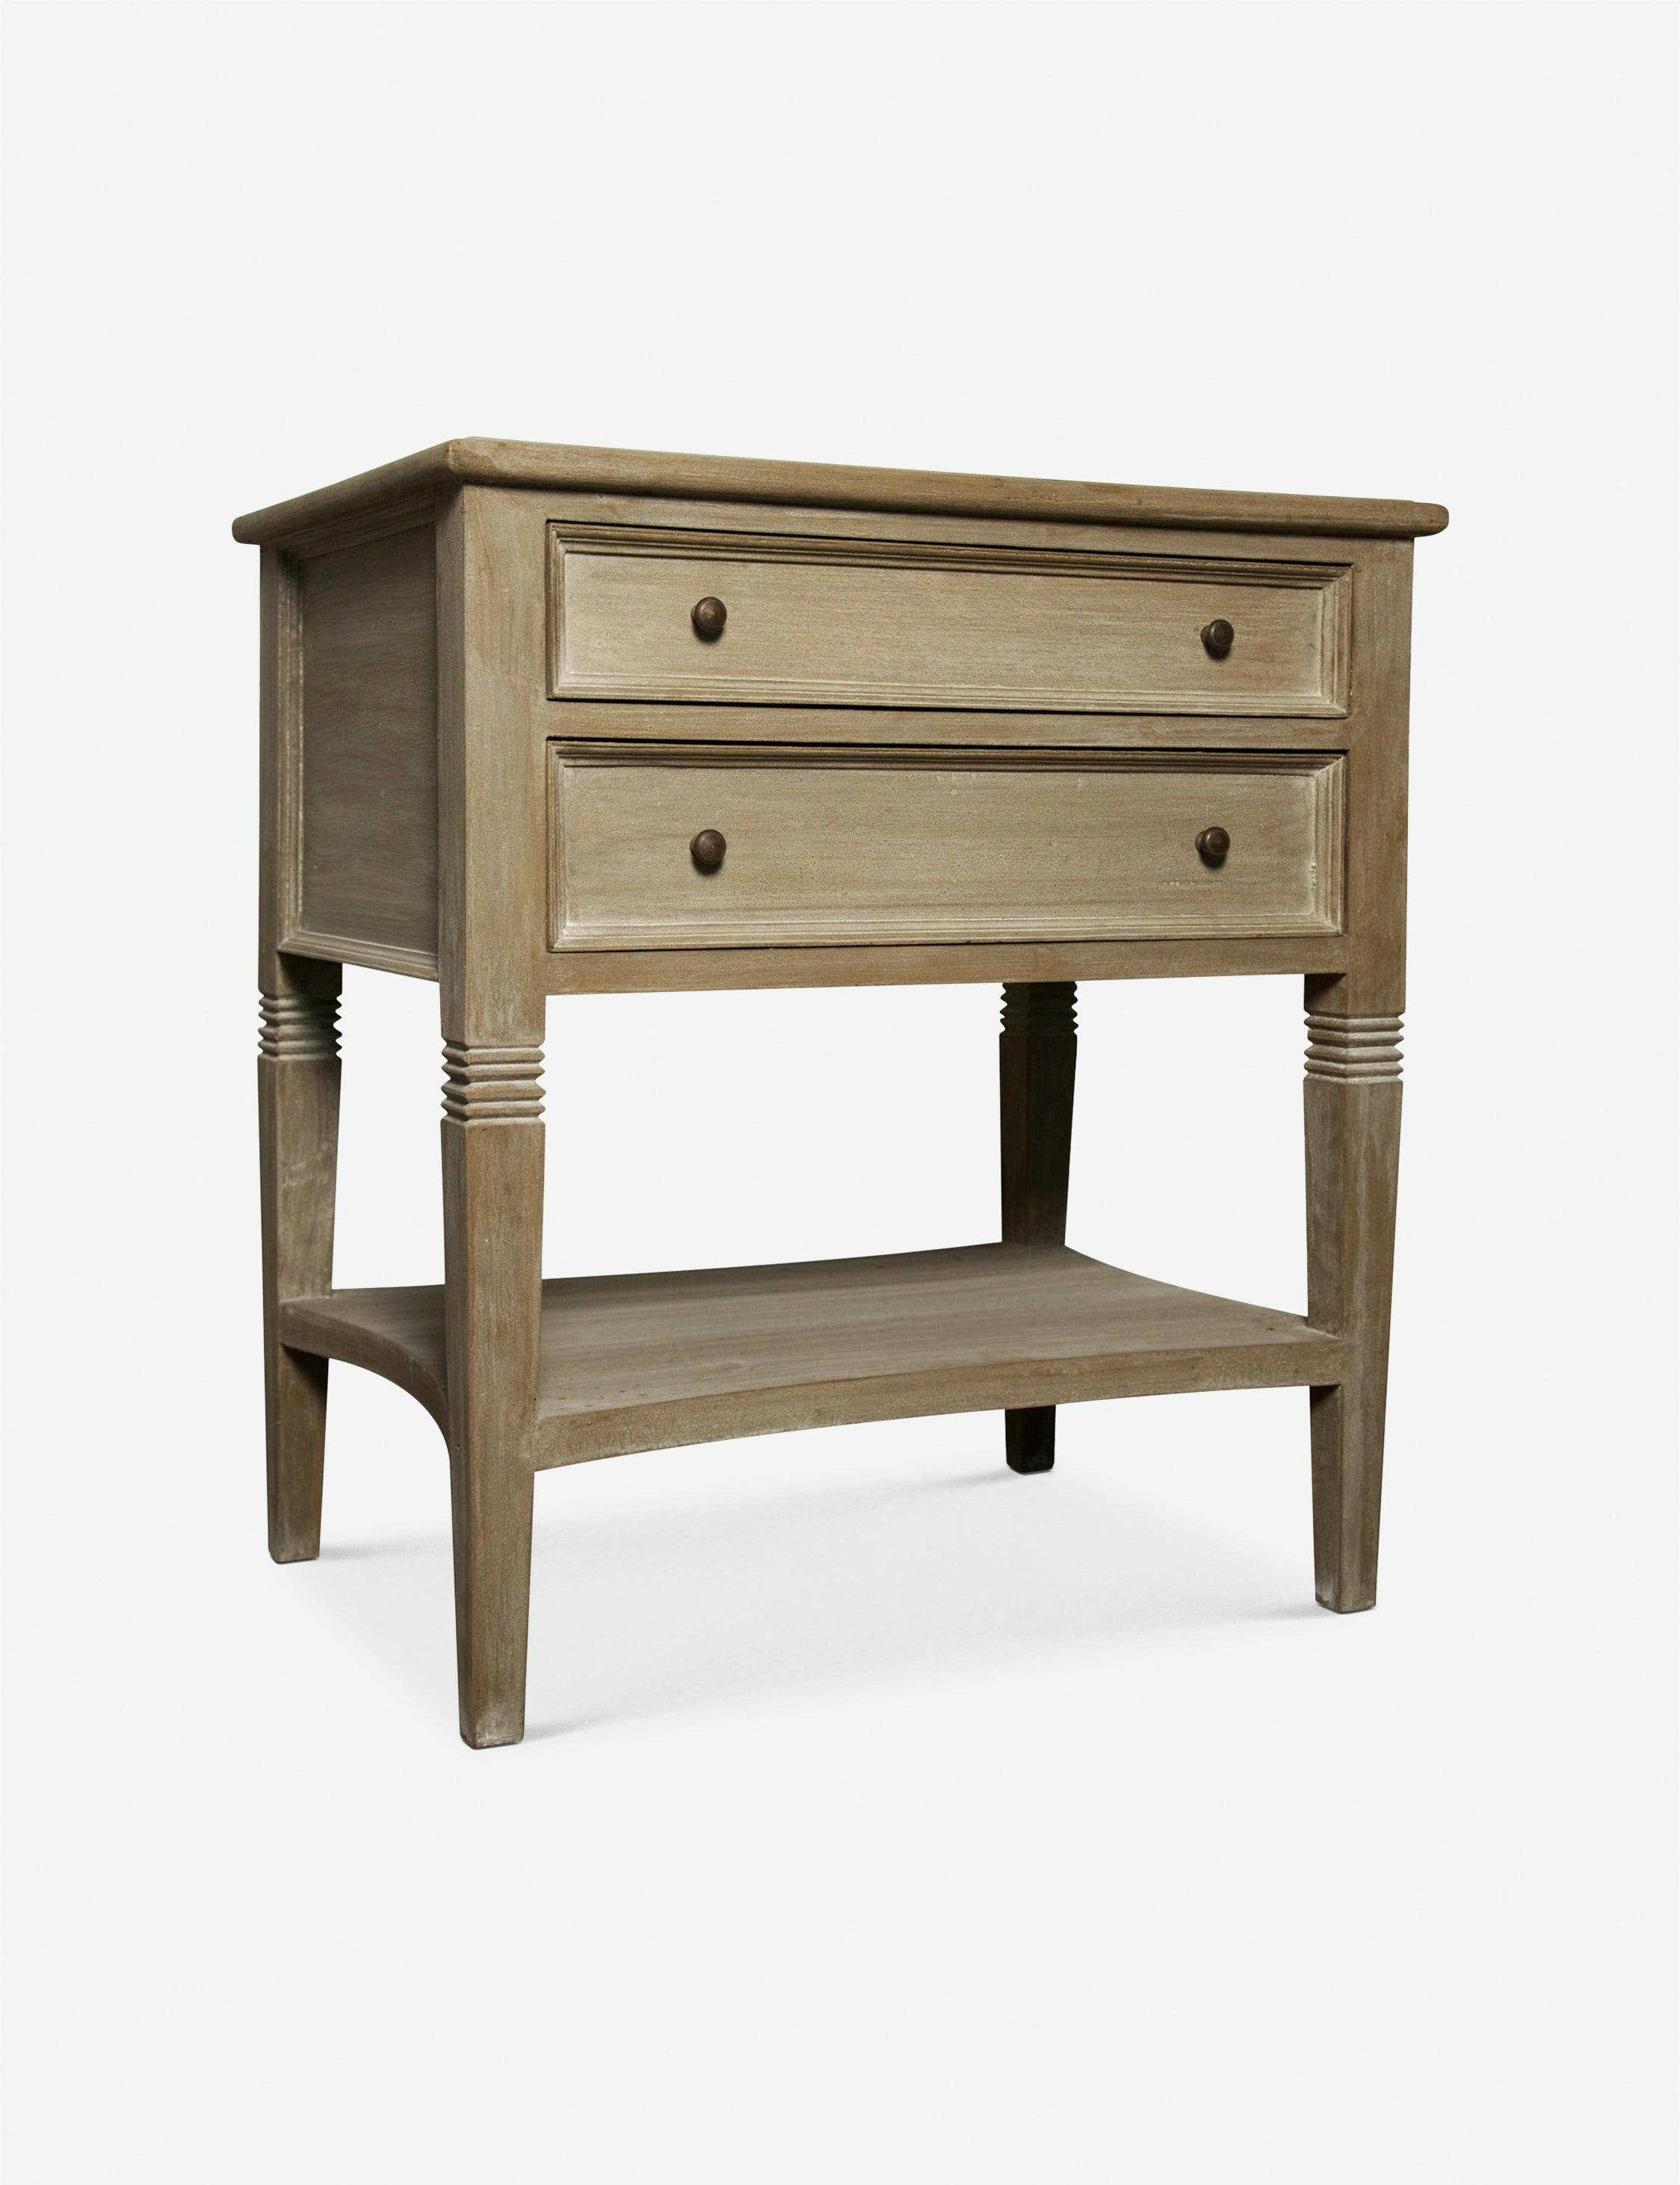 Colonial-Inspired Weathered 2-Drawer Nightstand with Carved Legs